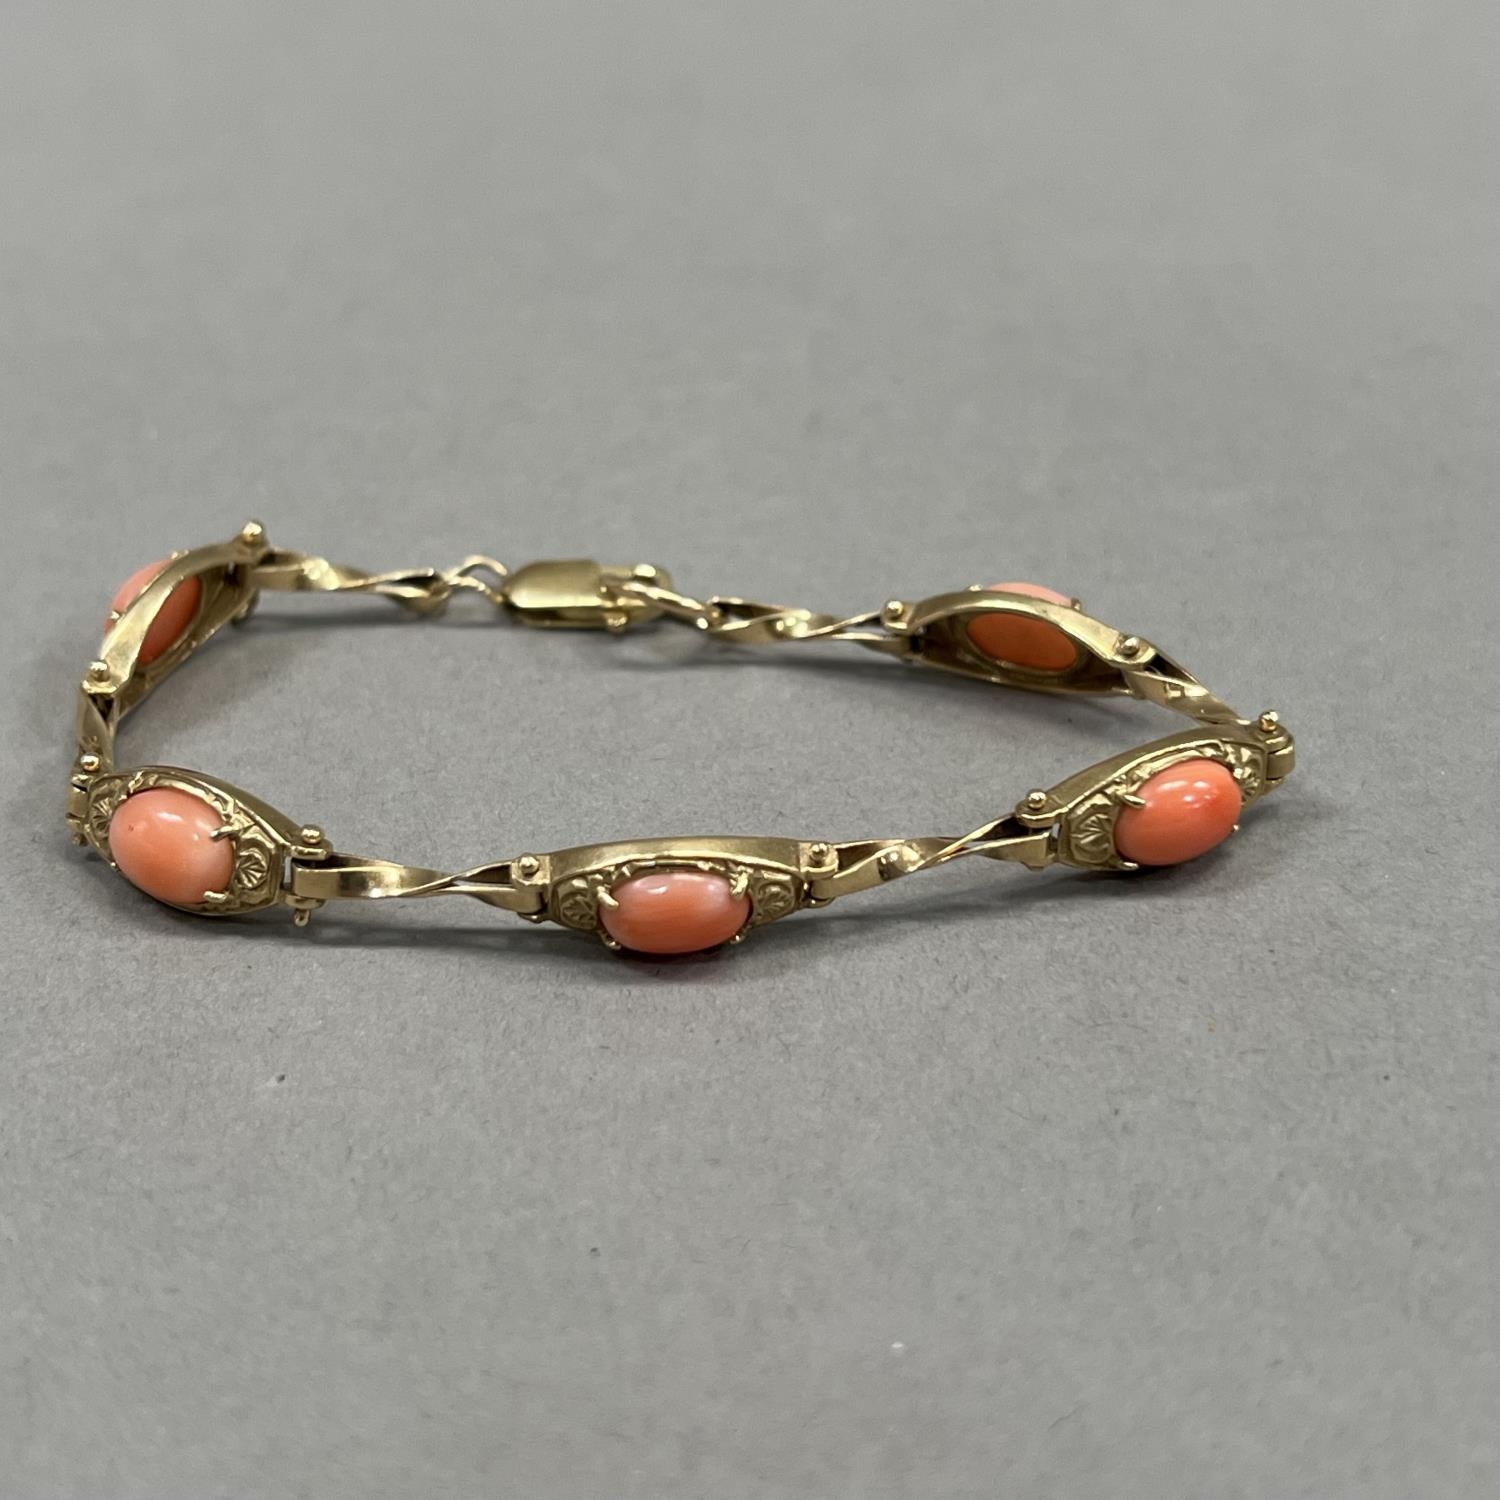 A coral bracelet in 9ct gold, each foliate patterned tonneau link claw set with an oval cabochon